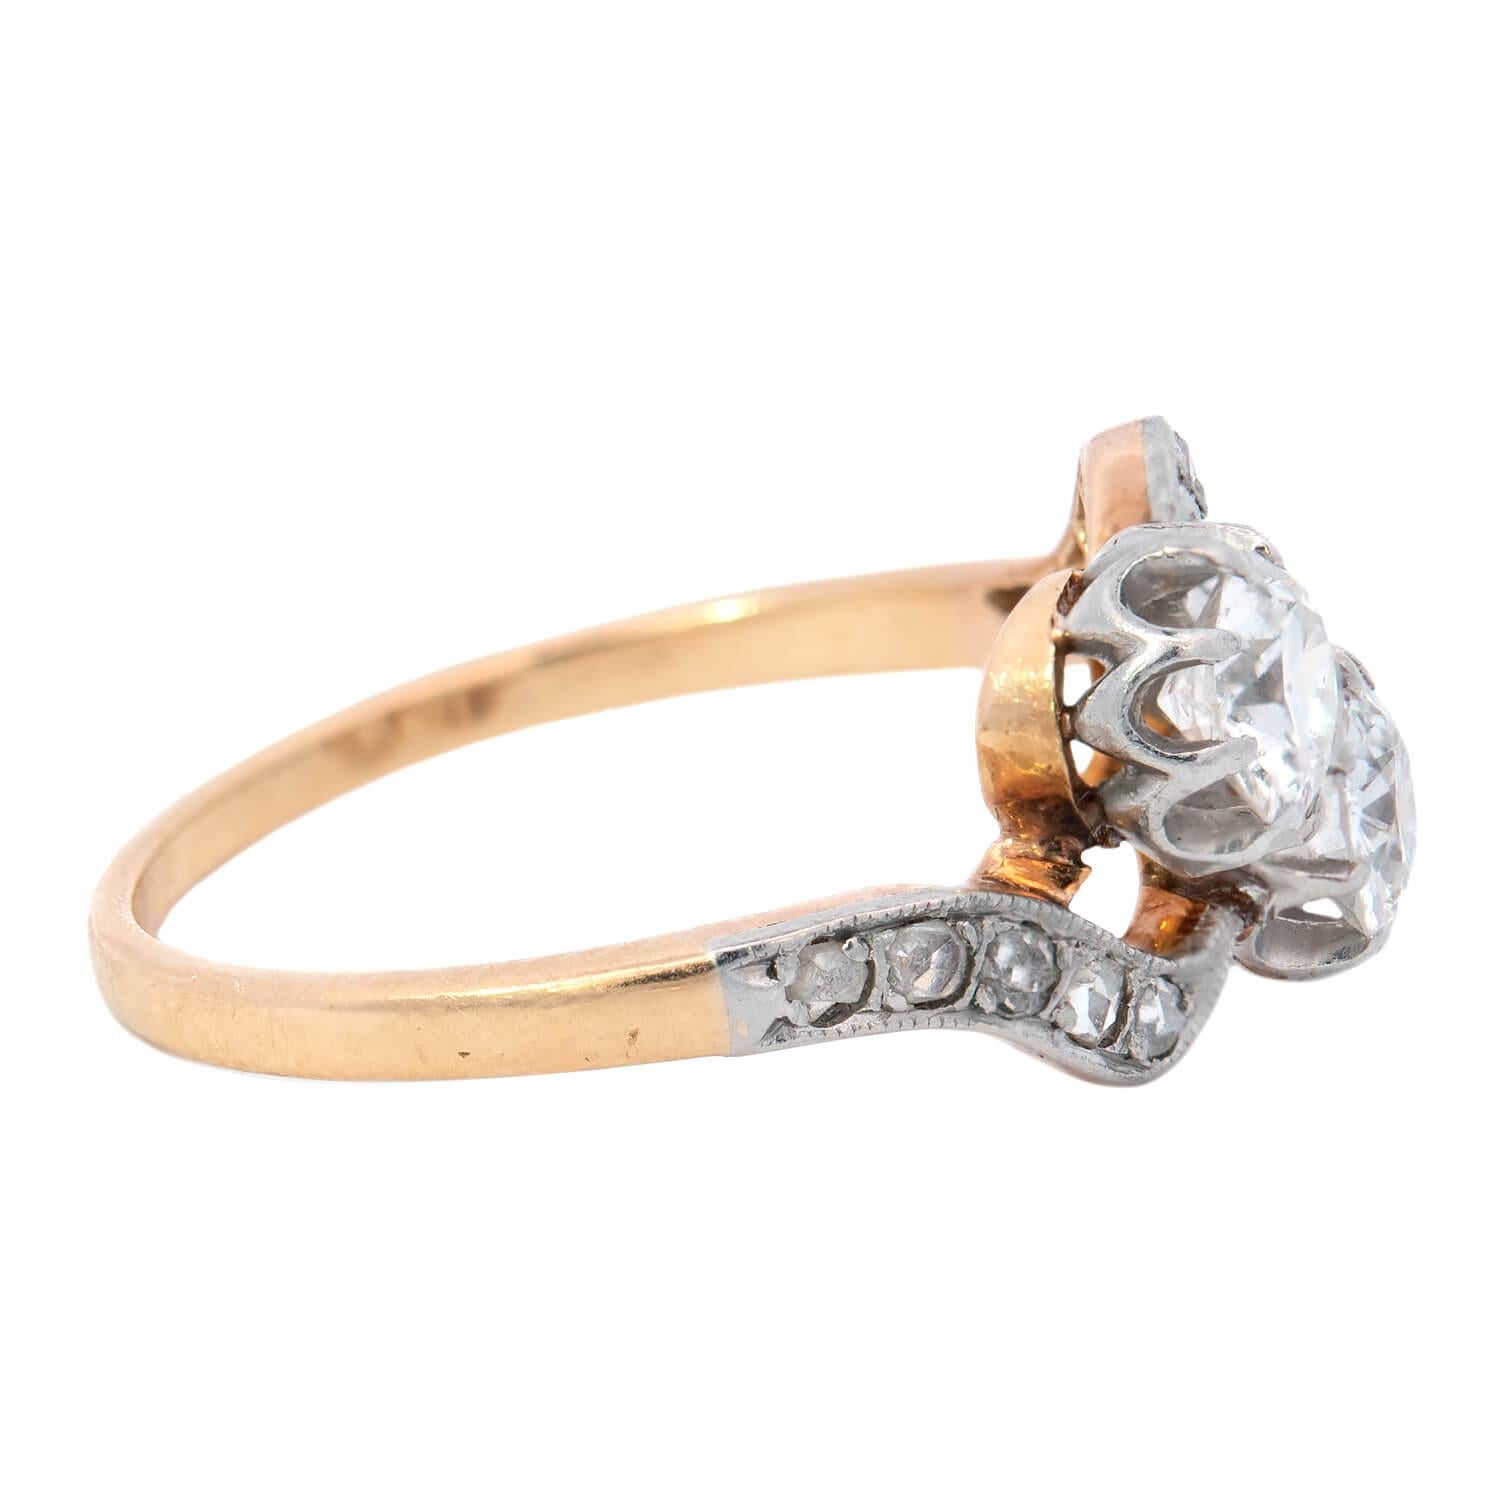 A unique and exquisite diamond bypass ring from the Edwardian (ca1910) era! Crafted in 18k yellow gold topped with Platinum, this piece features two Round Cut diamonds that are nestled together at the center, forming a stylish 